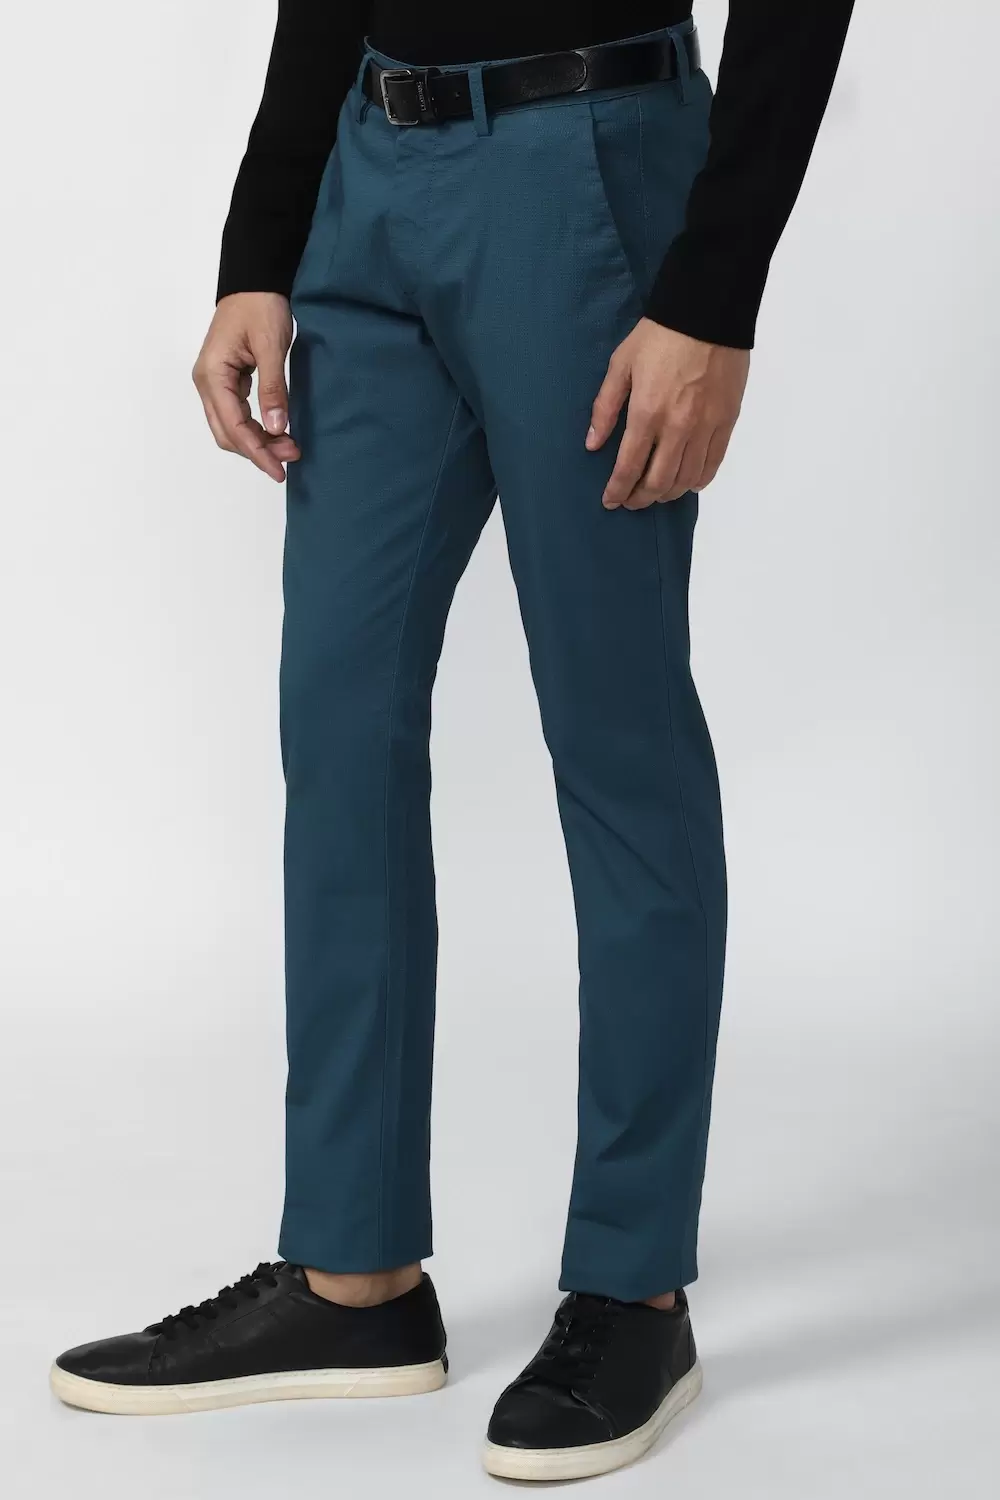 Peter England Blue Slim Fit Trousers